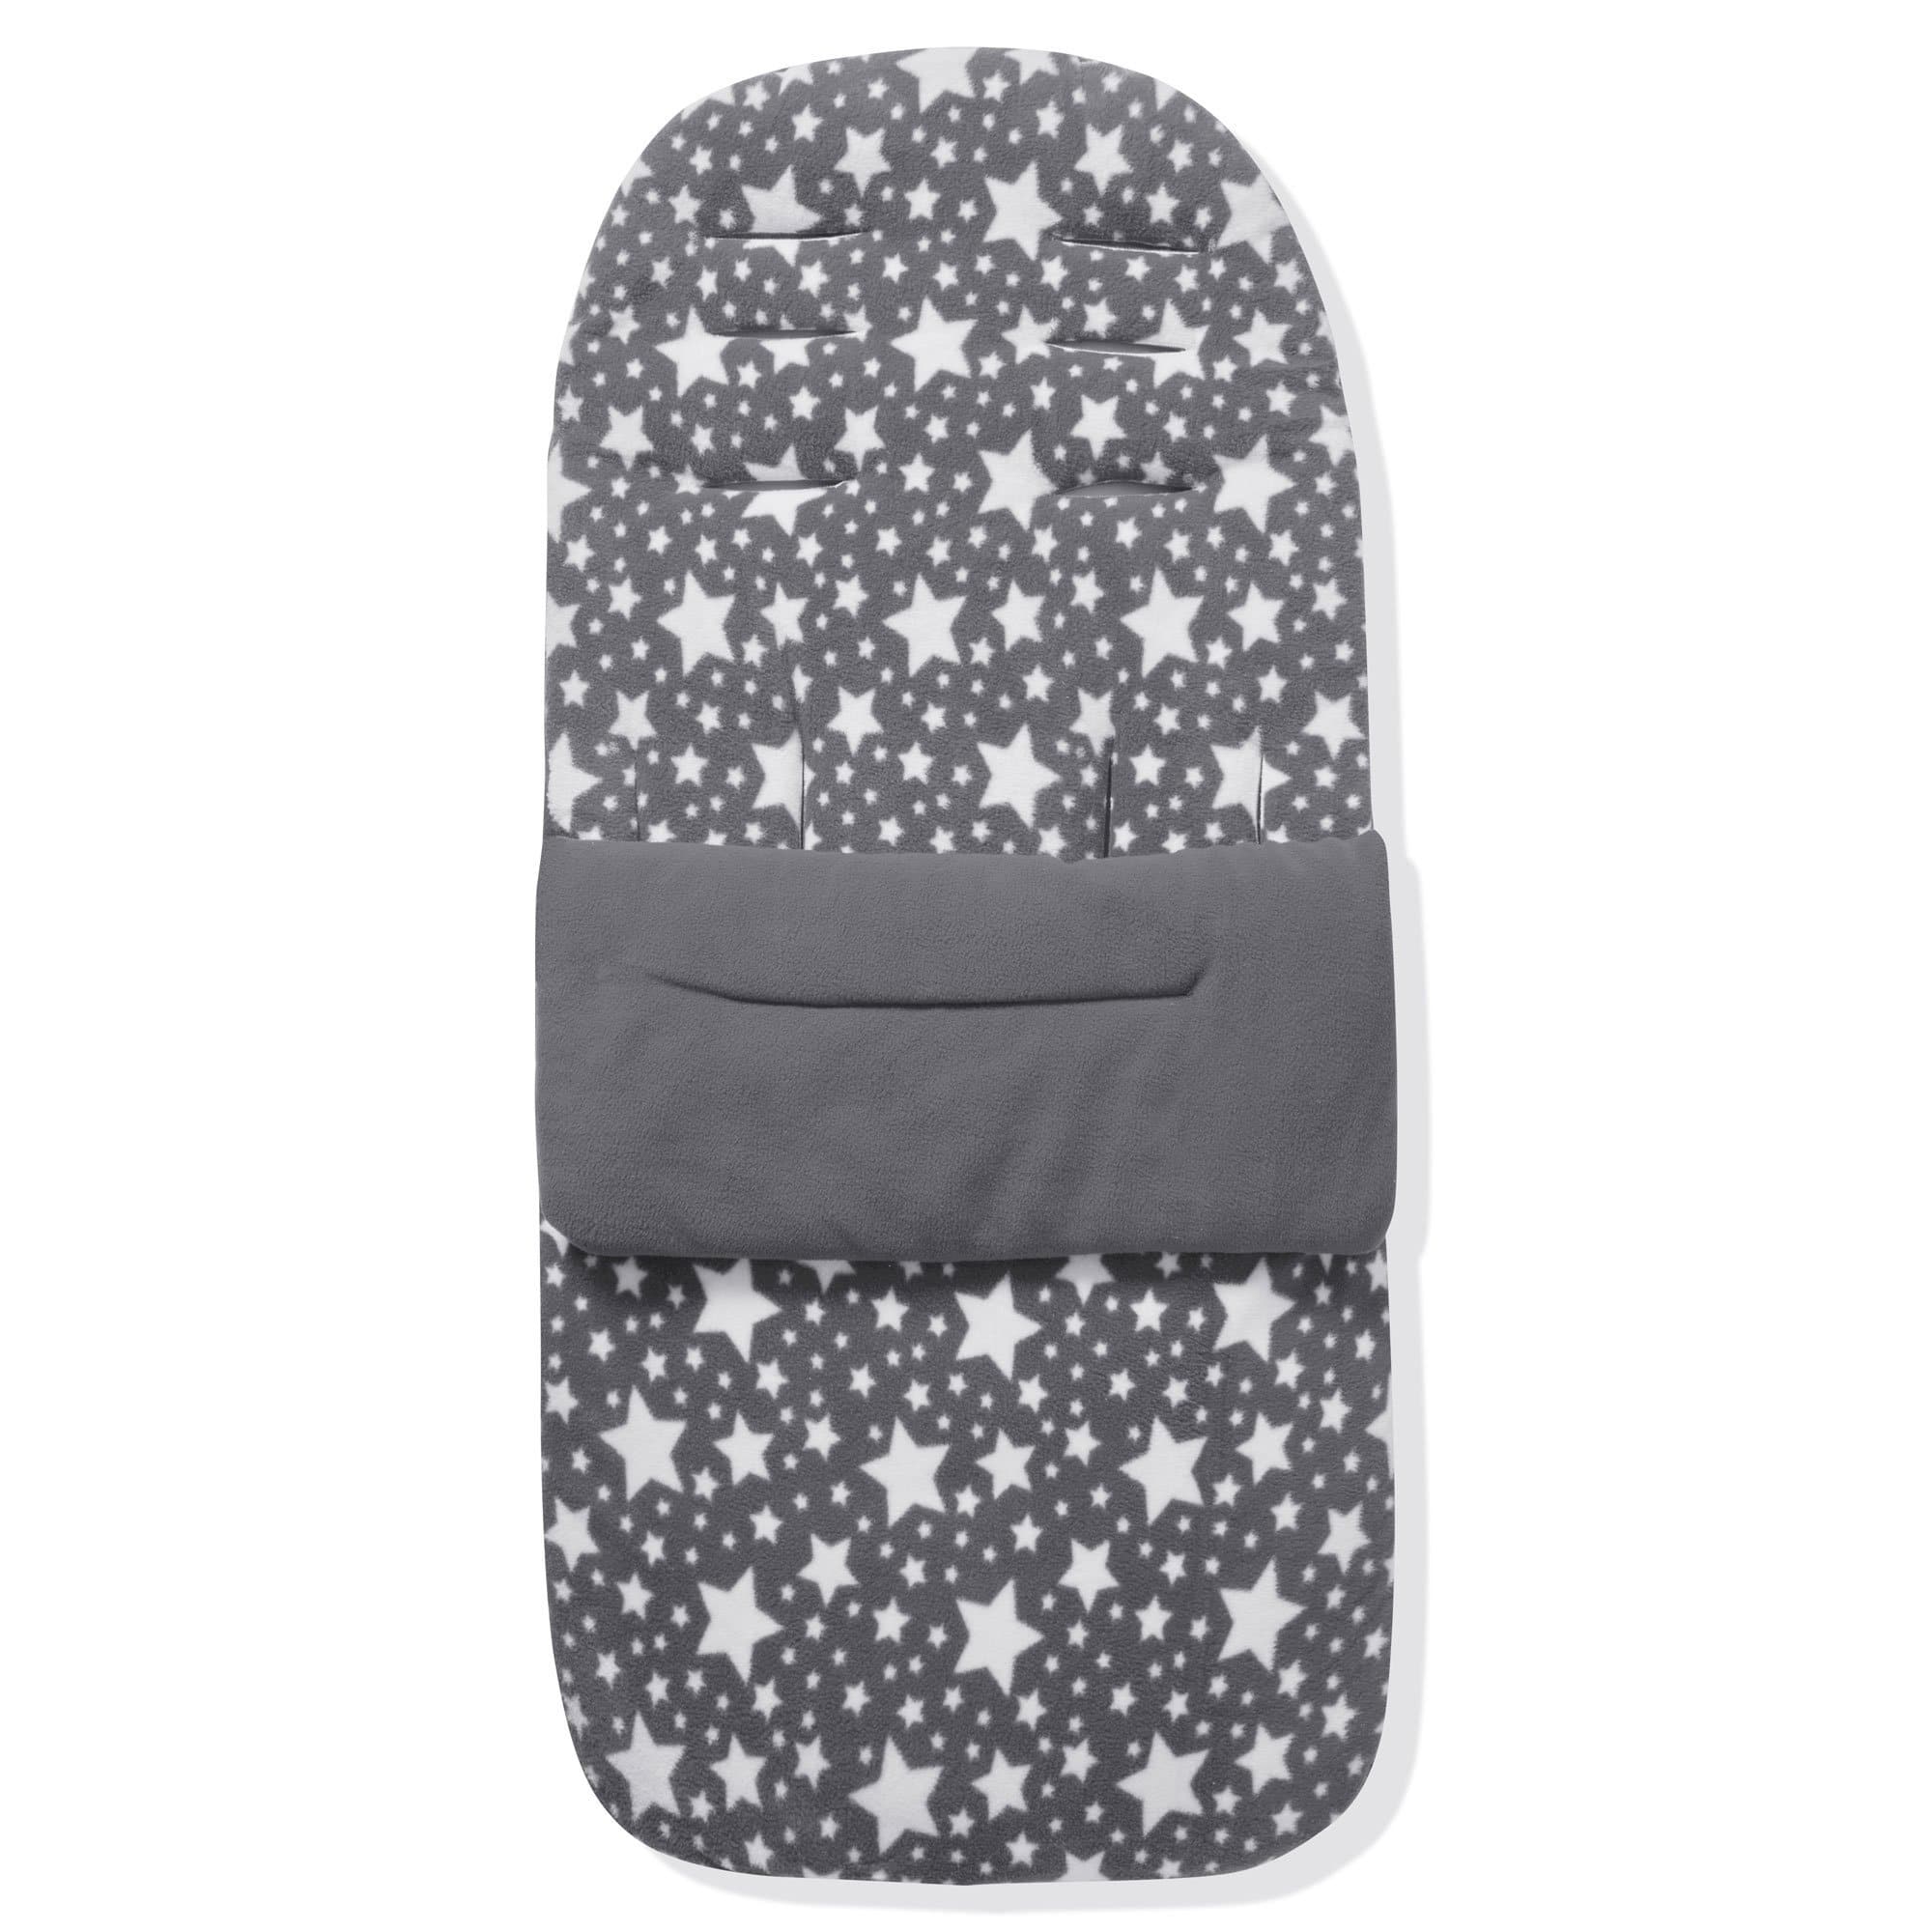 Fleece Footmuff / Cosy Toes Compatible with Kinderkraft - Grey Star / Fits All Models | For Your Little One